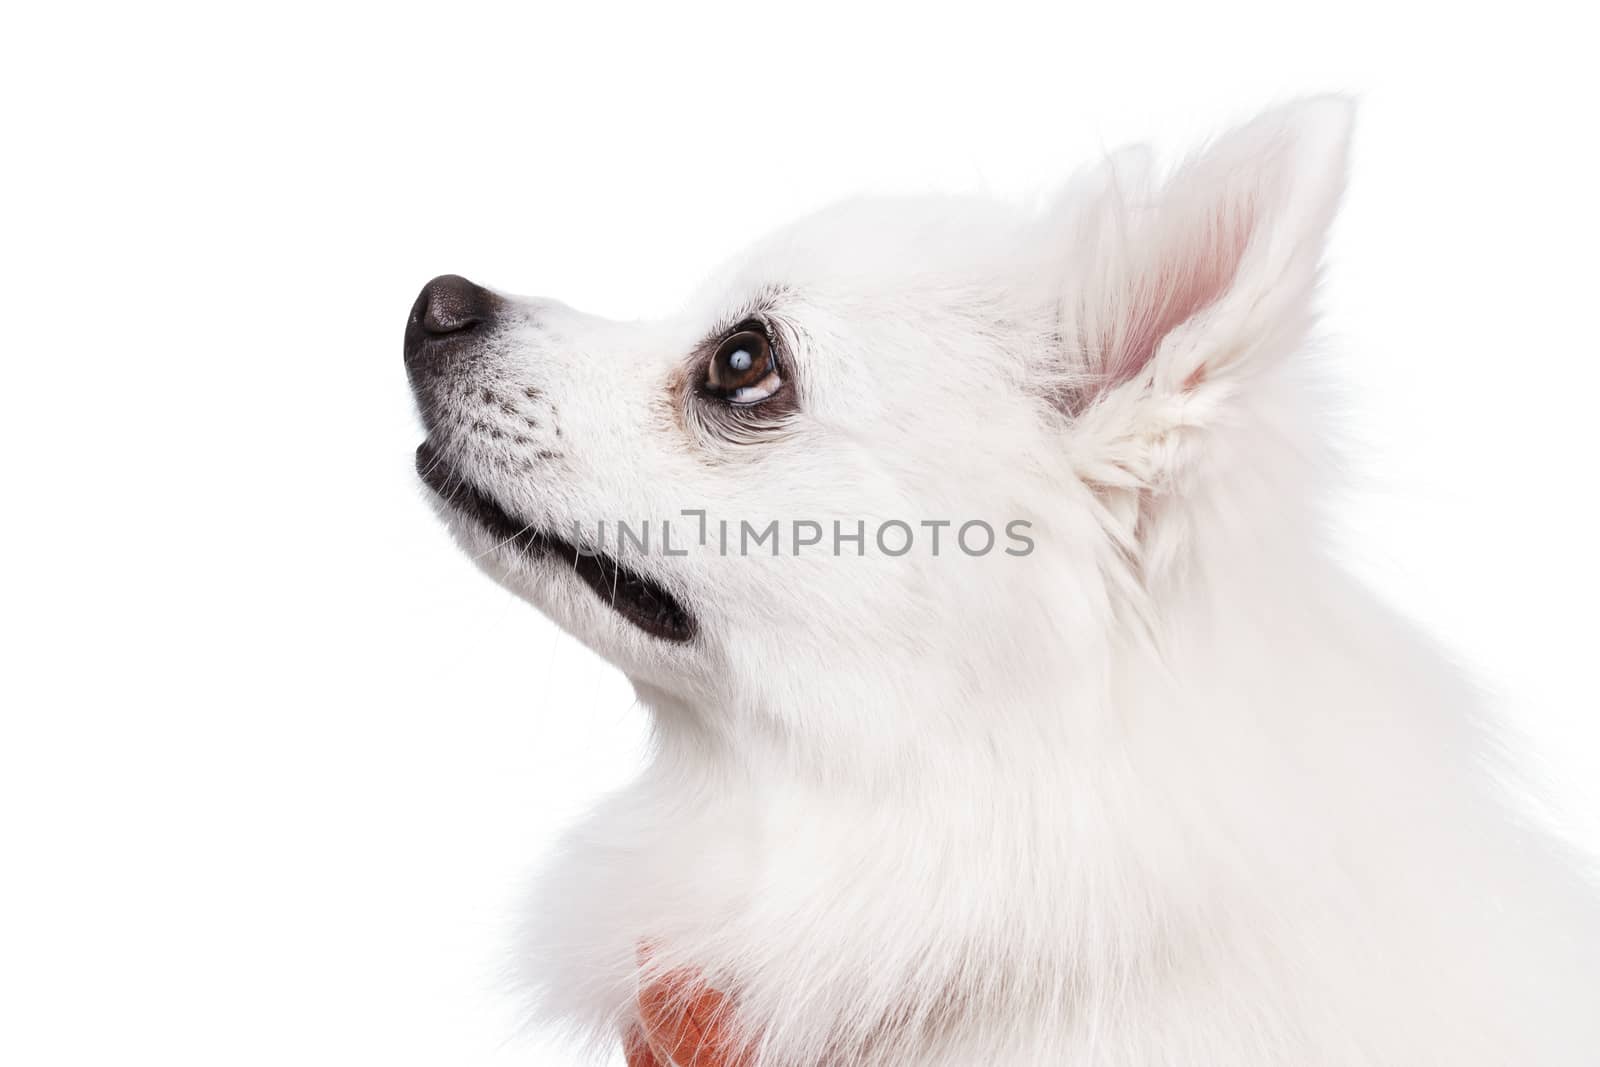 The white tears of the young Spitz smile Studio shot